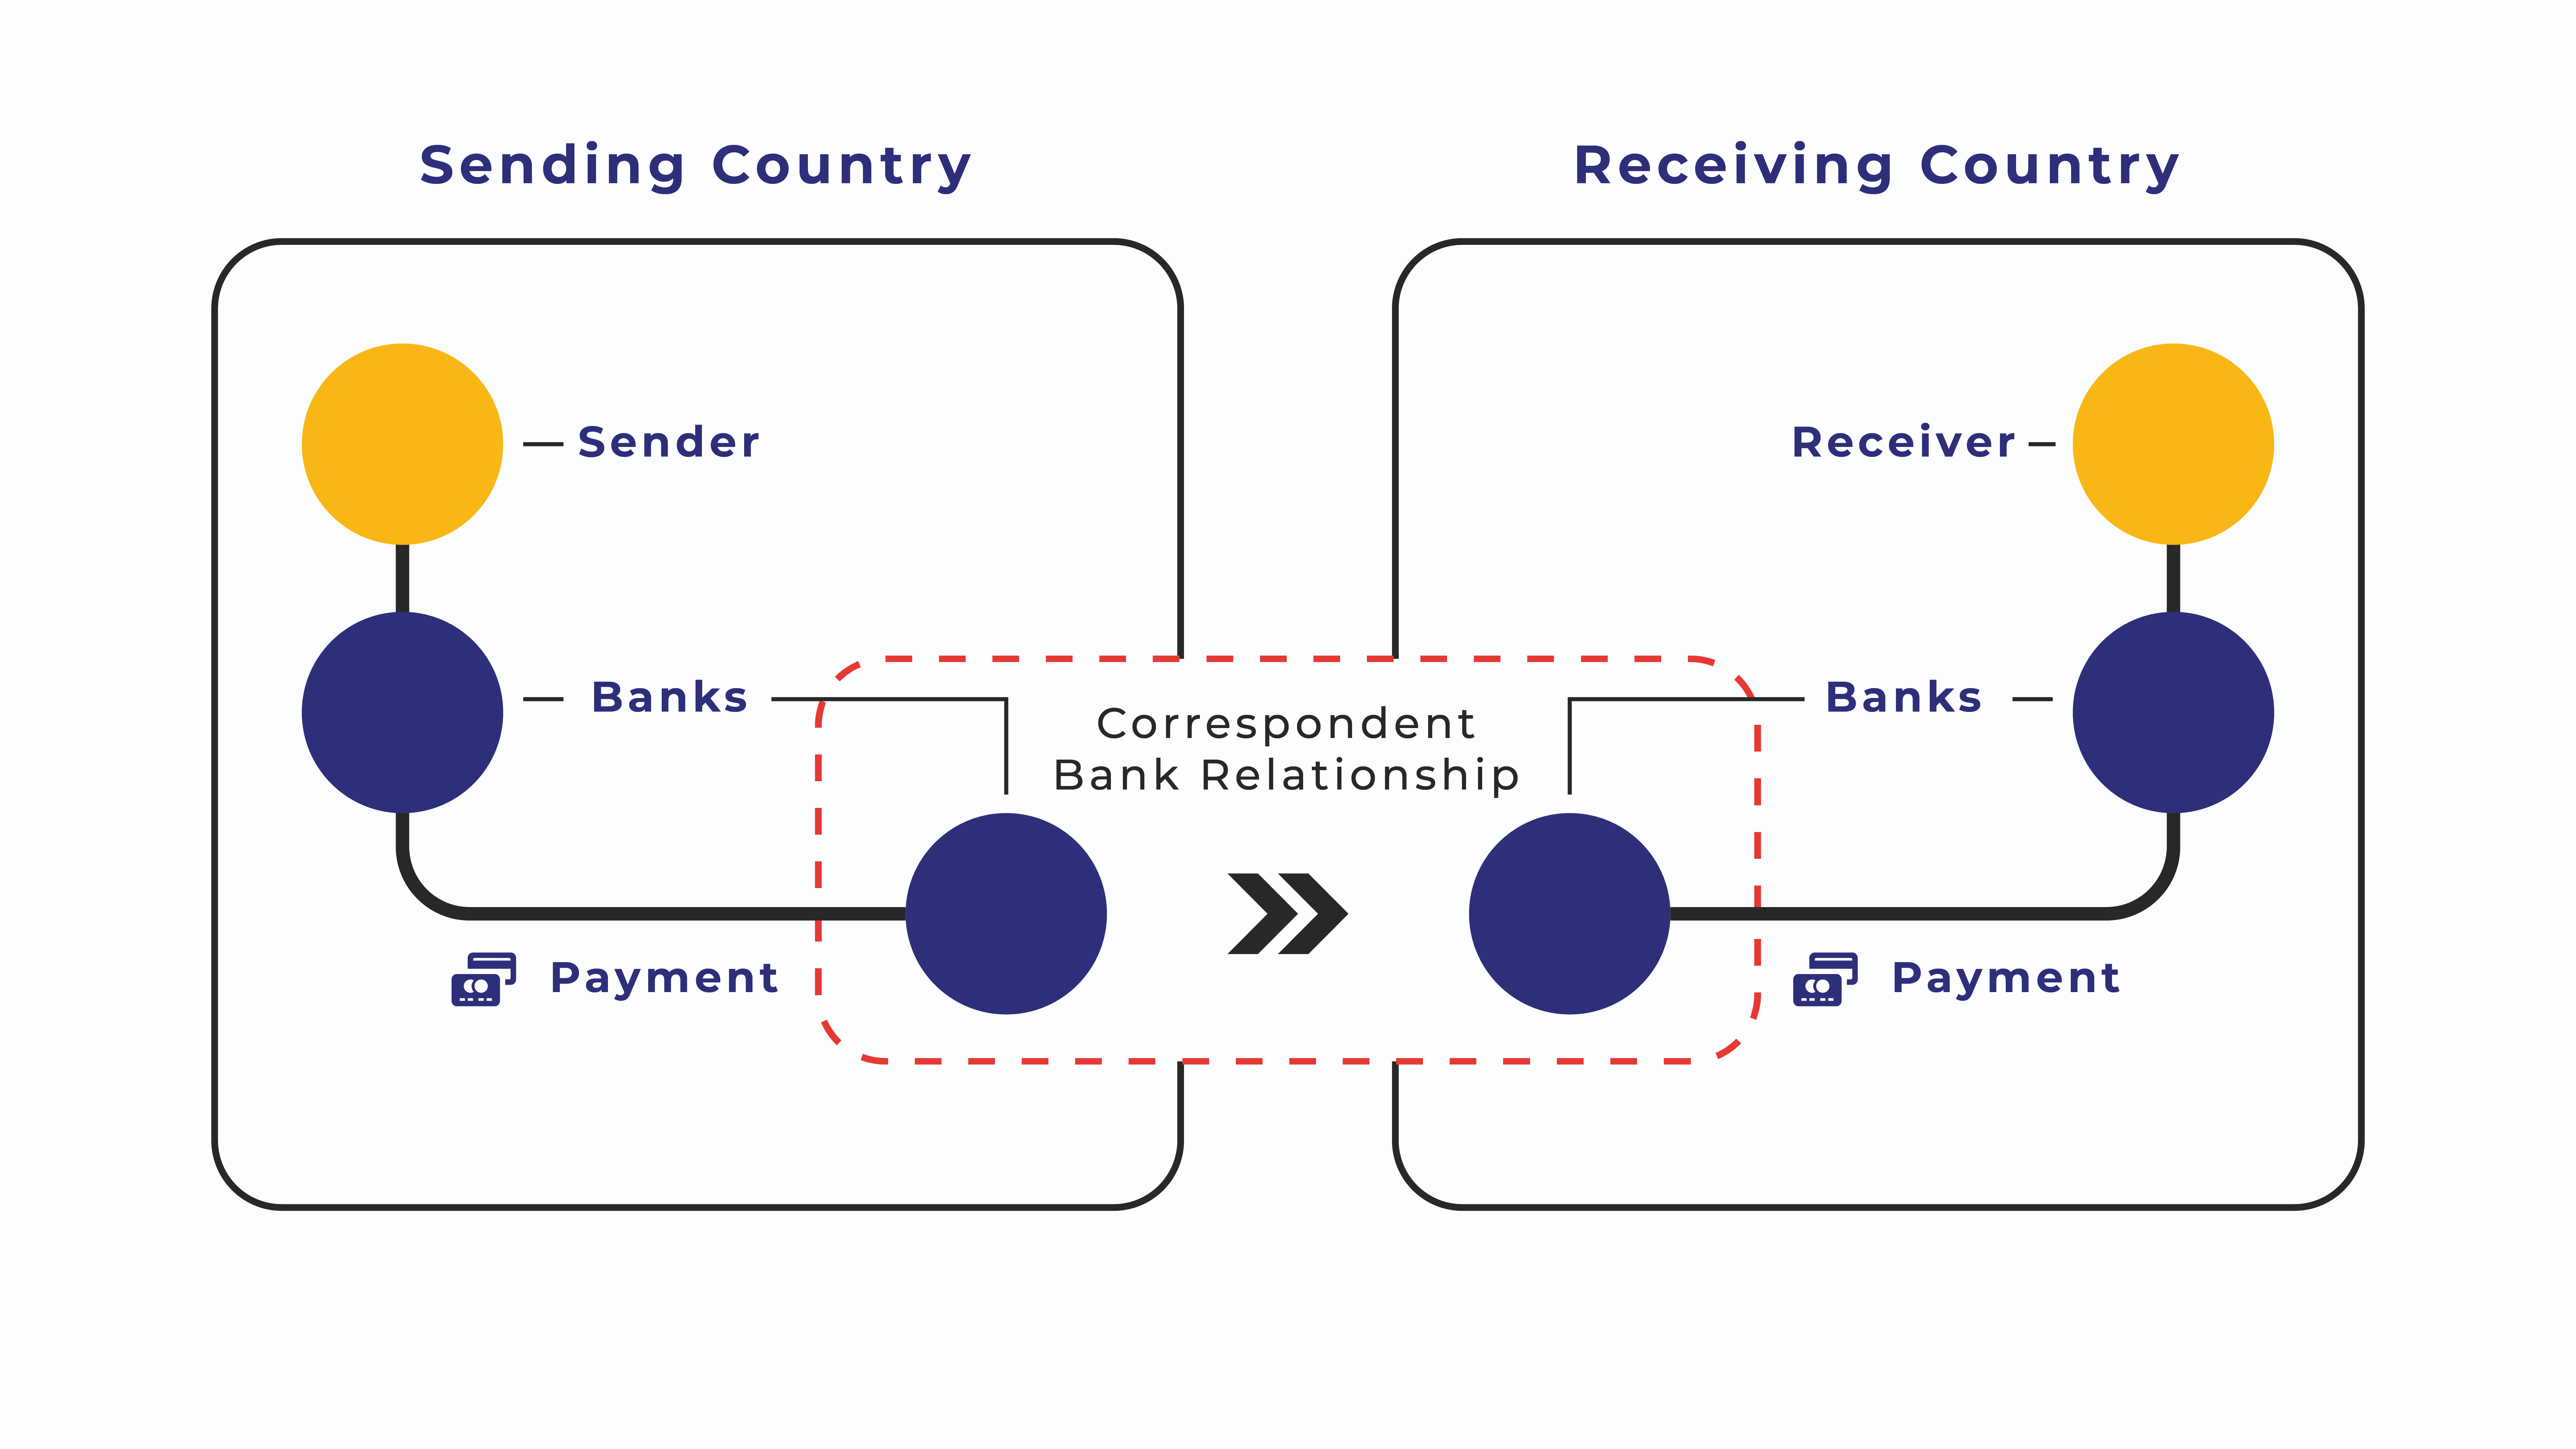 Globally, payment networks are not standardized or effectively integrated